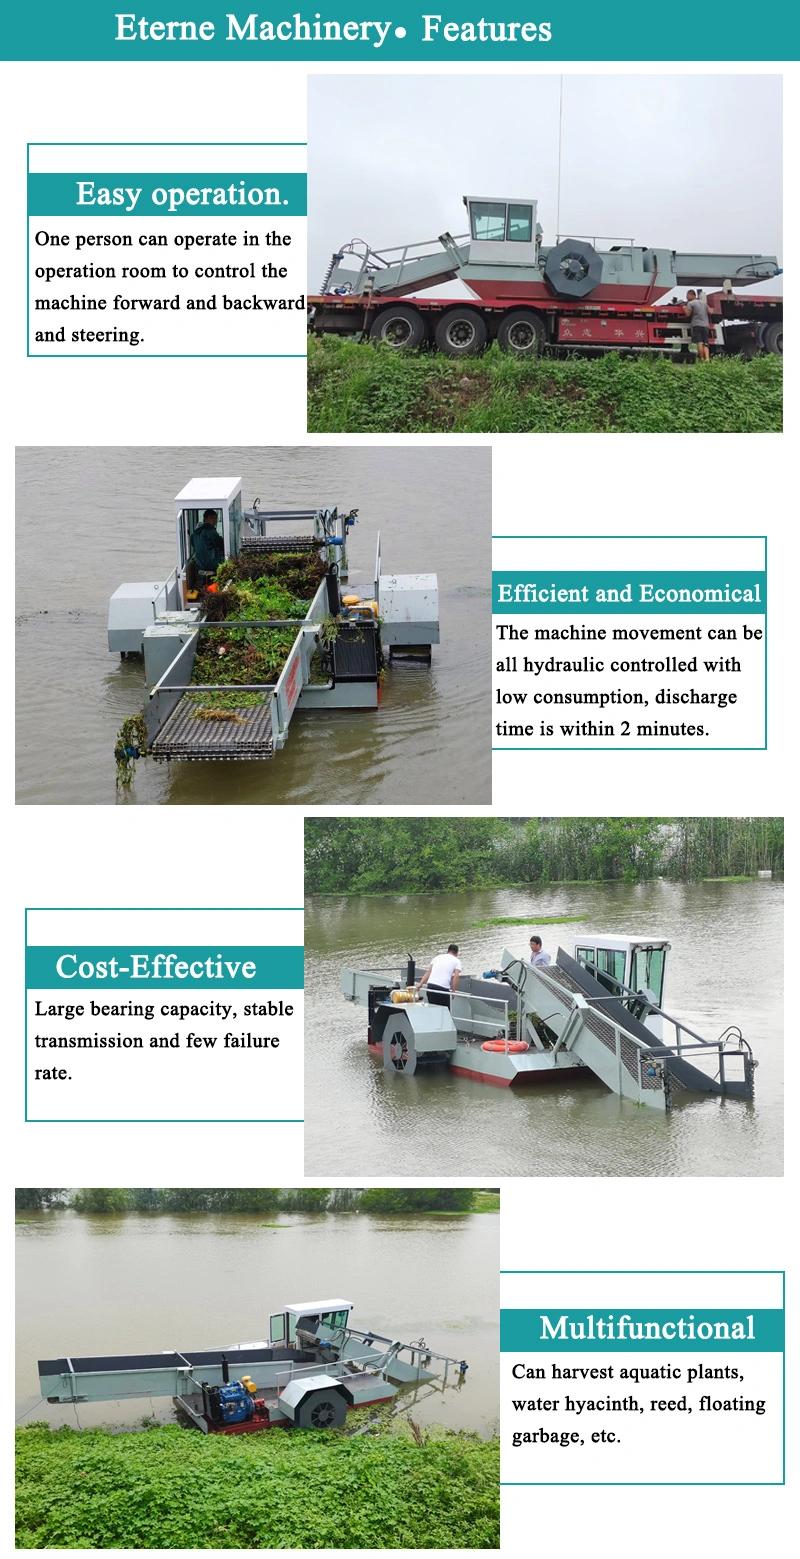 Garbage Salvage Weed Cutting Machine Equipment Plant Harvester Aquatic Weed Harvester Machine Water Hyacinth Collecting Boat / Ship / Vessel